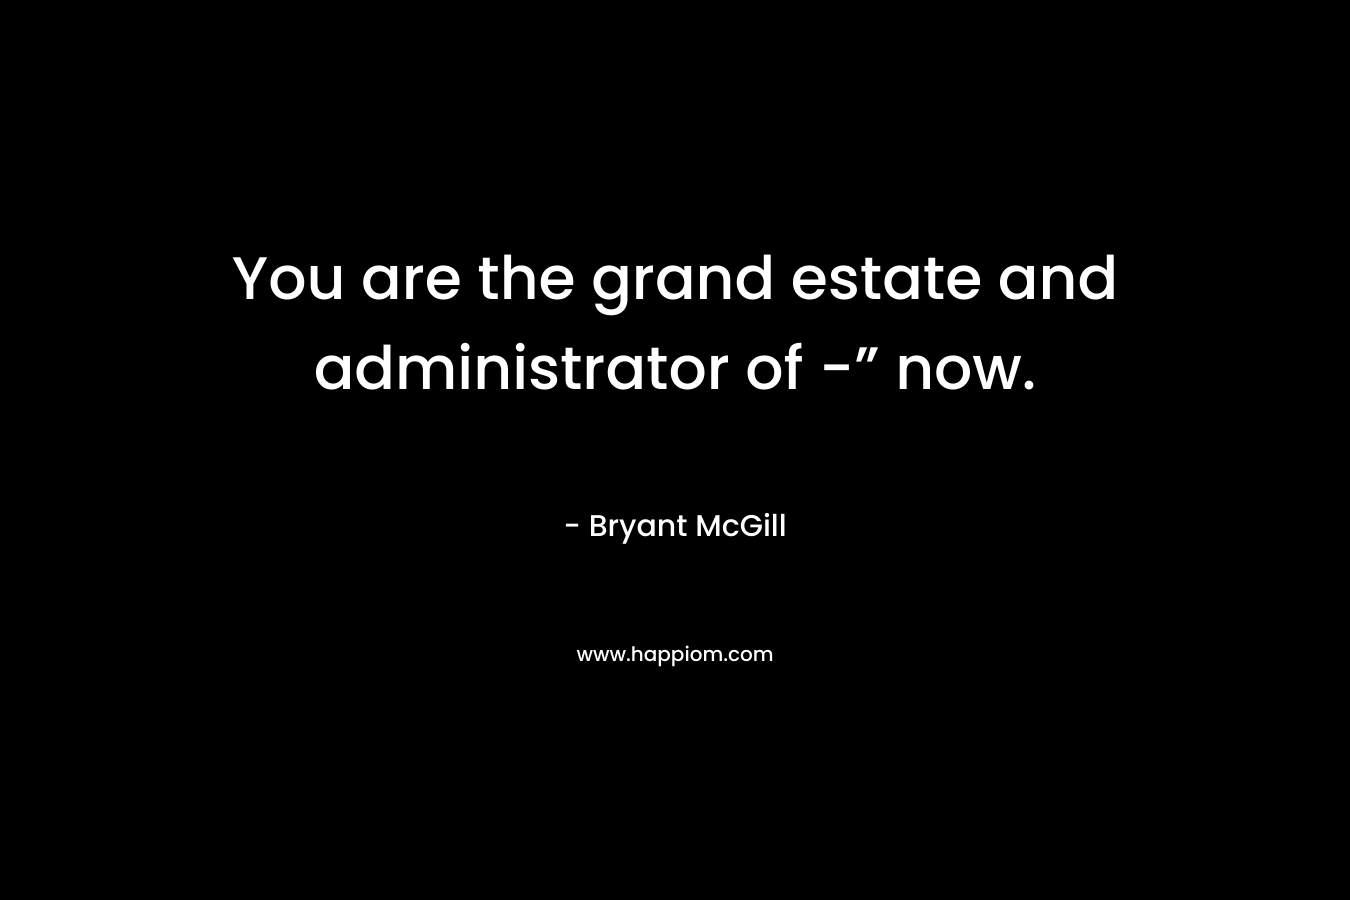 You are the grand estate and administrator of -” now. – Bryant McGill